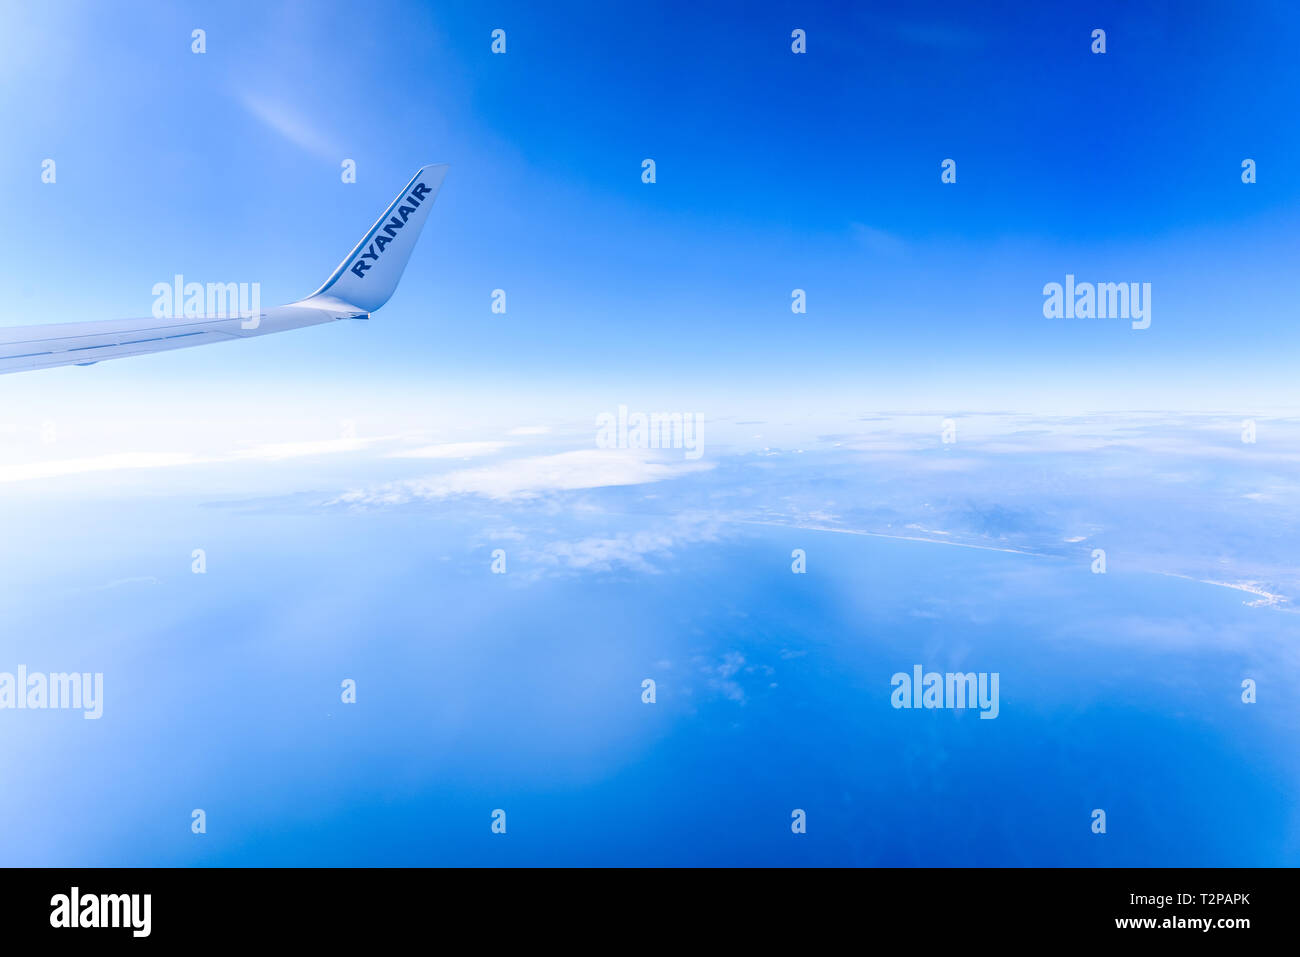 Valencia, Spain - March 8, 2019: Flaps of an Ryanair airplane seen from inside during a flight over the clouds of the sky. Stock Photo